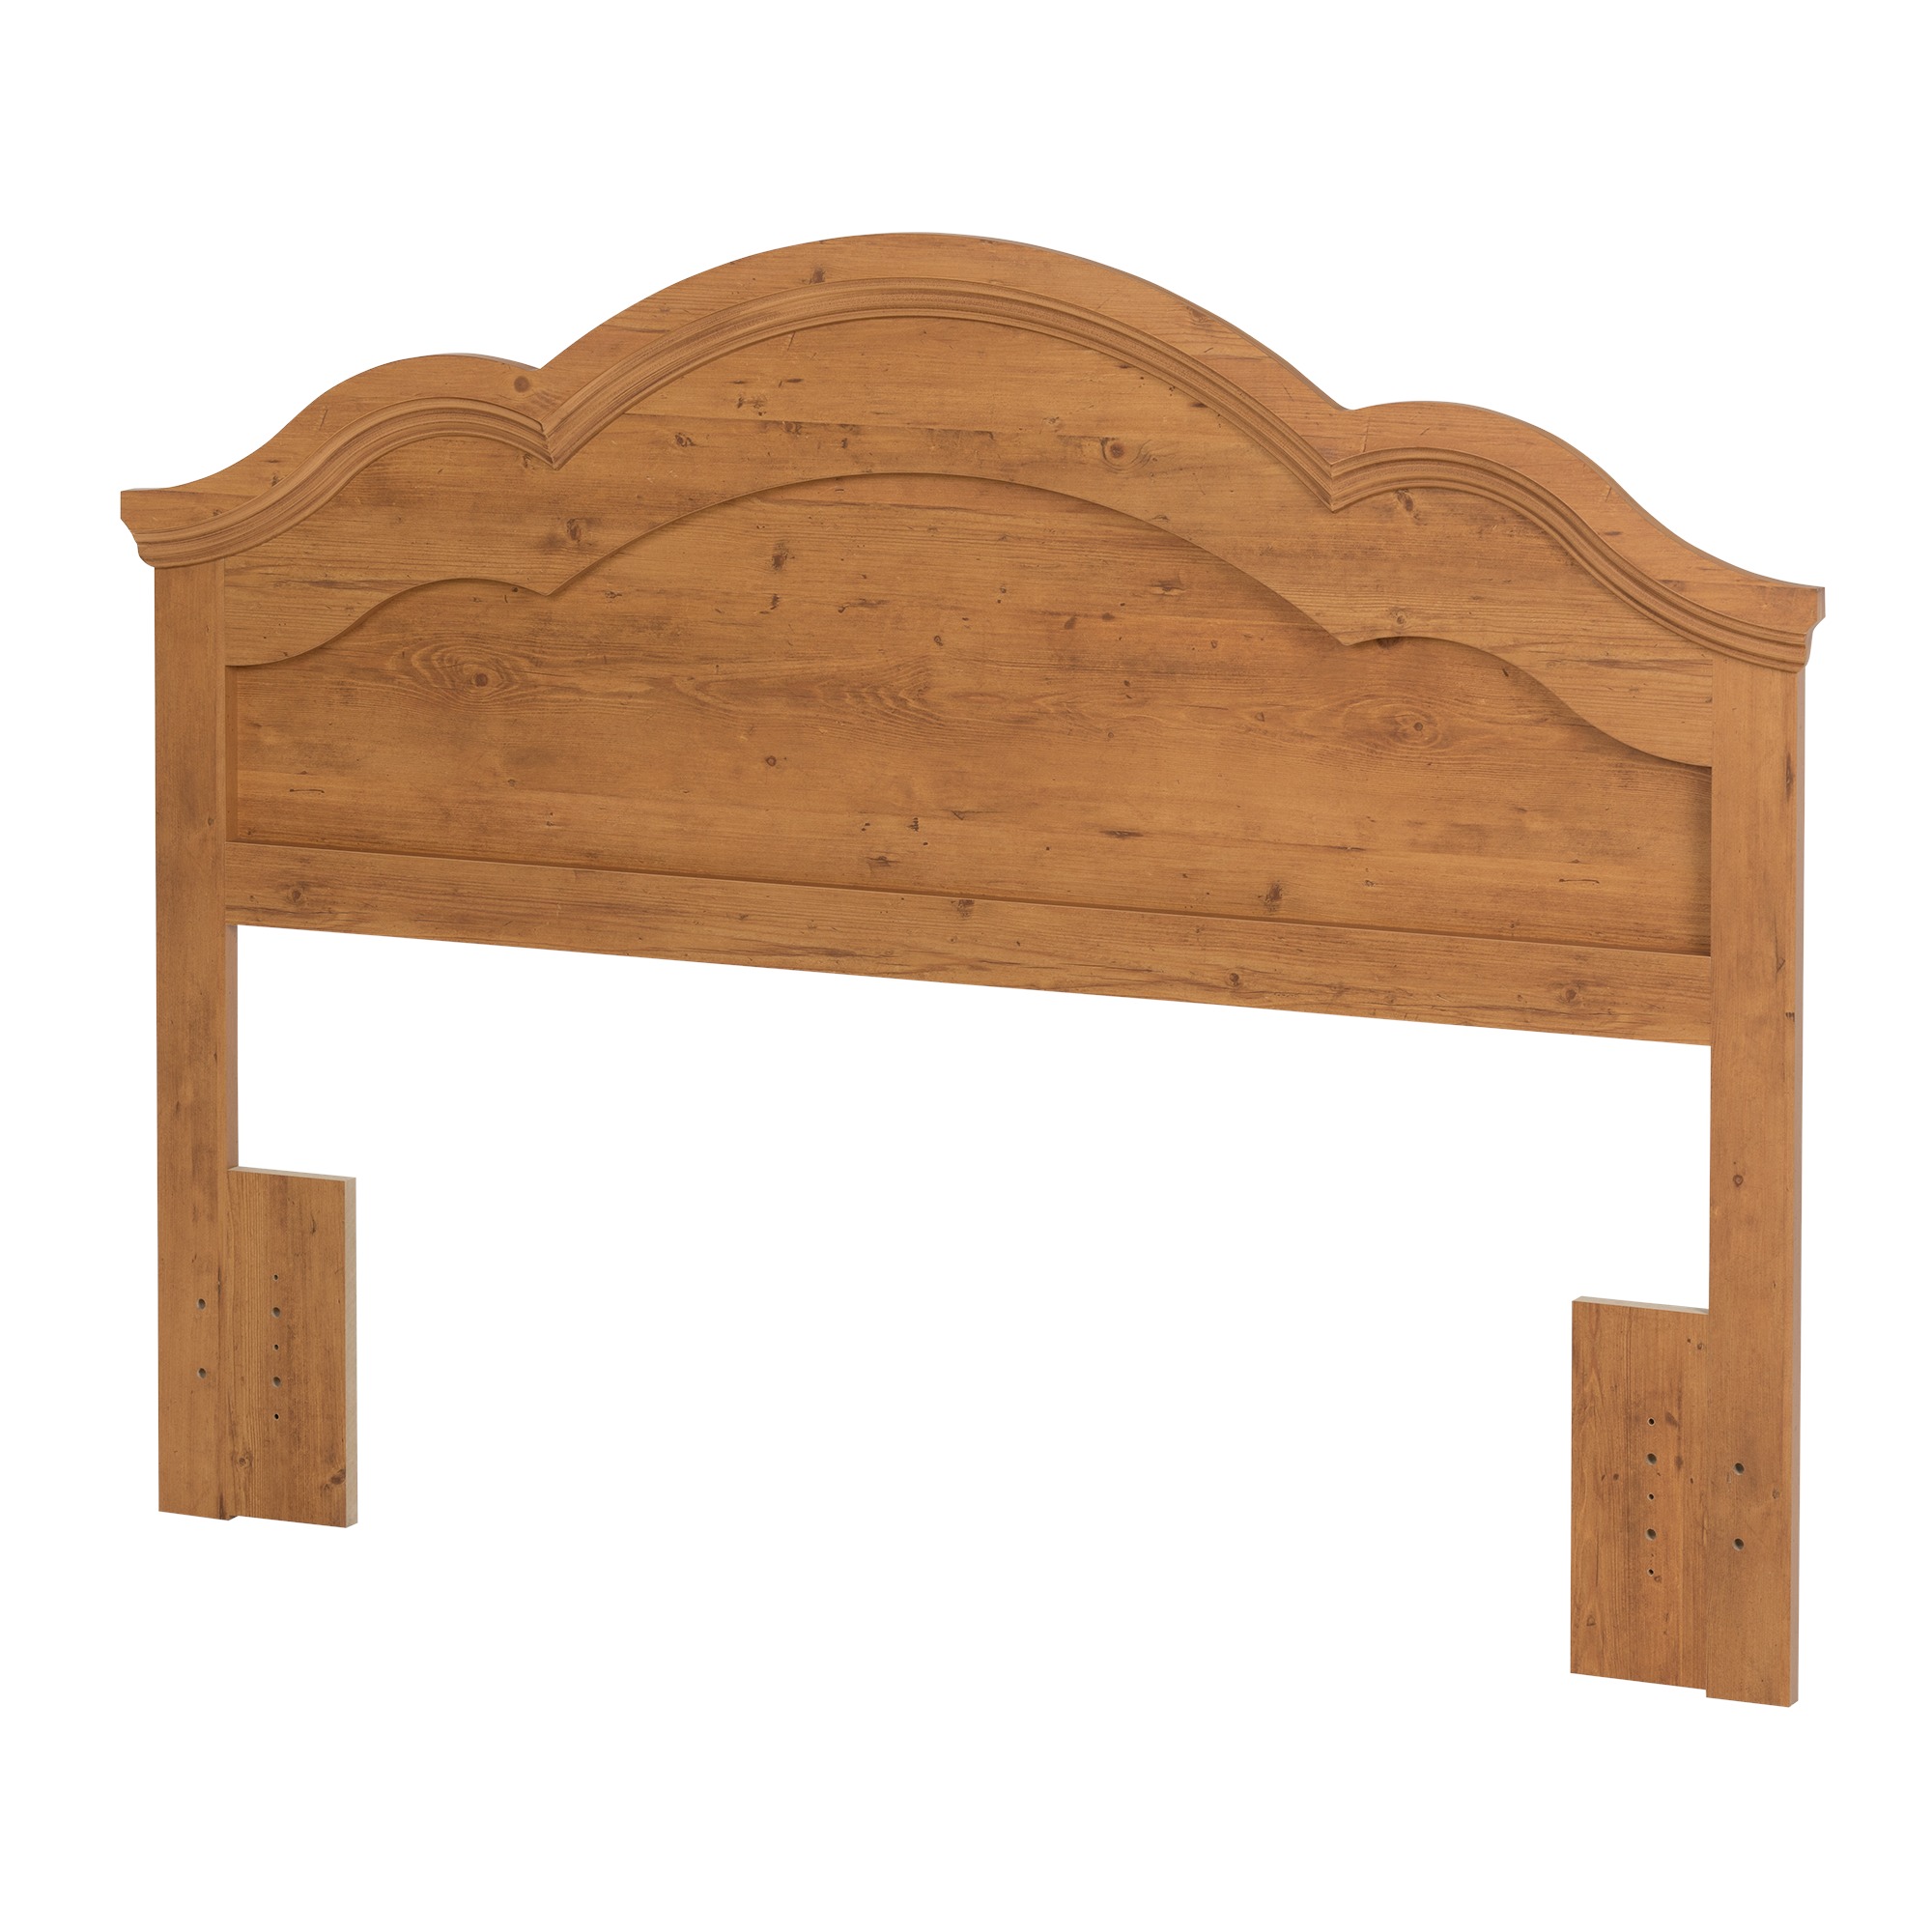 South Shore Prairie Full/Queen Headboard, Country Pine - image 1 of 7